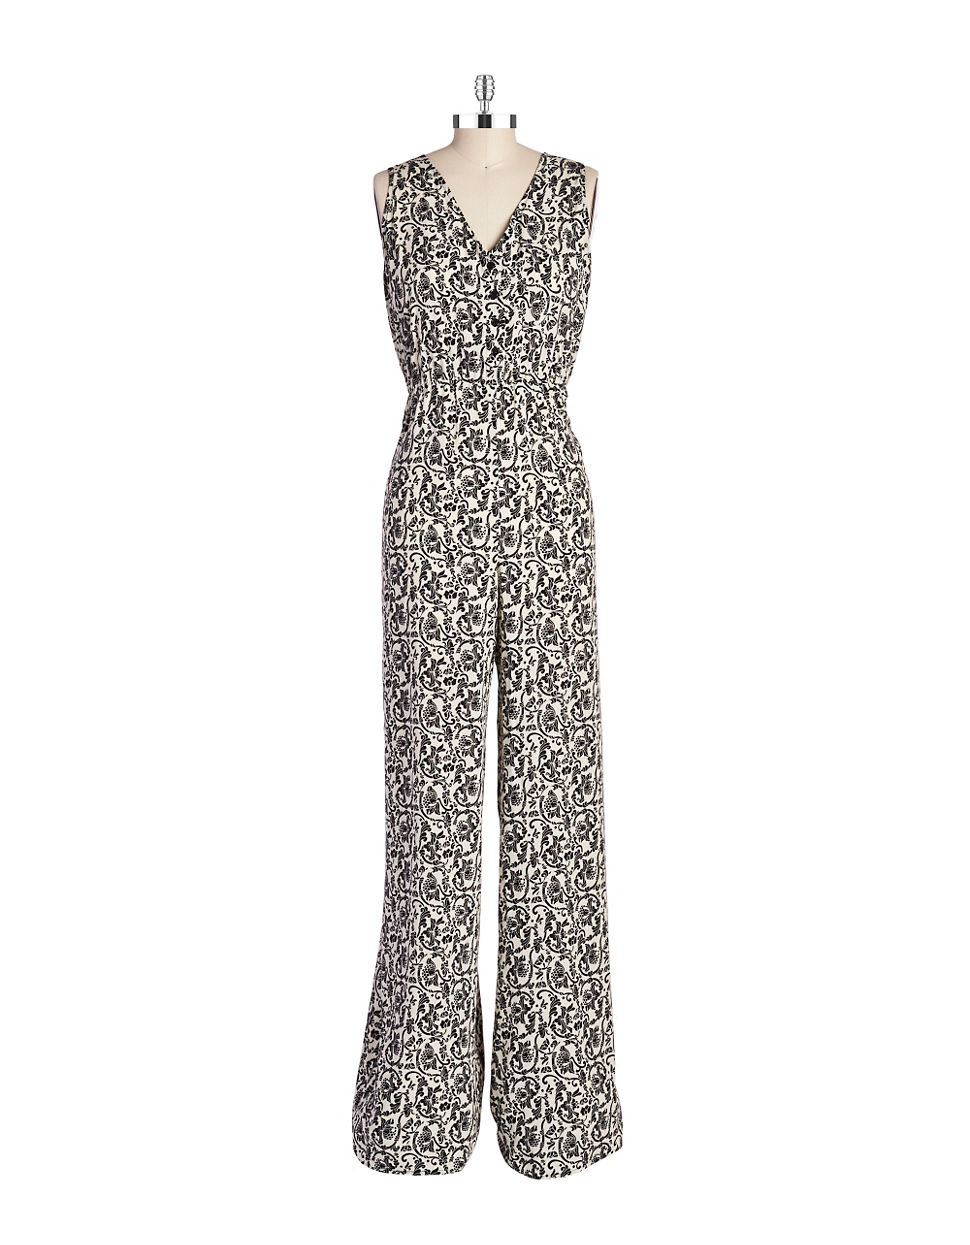 Lyst - Lord & Taylor Wide Leg Patterned Jumpsuit in Gray